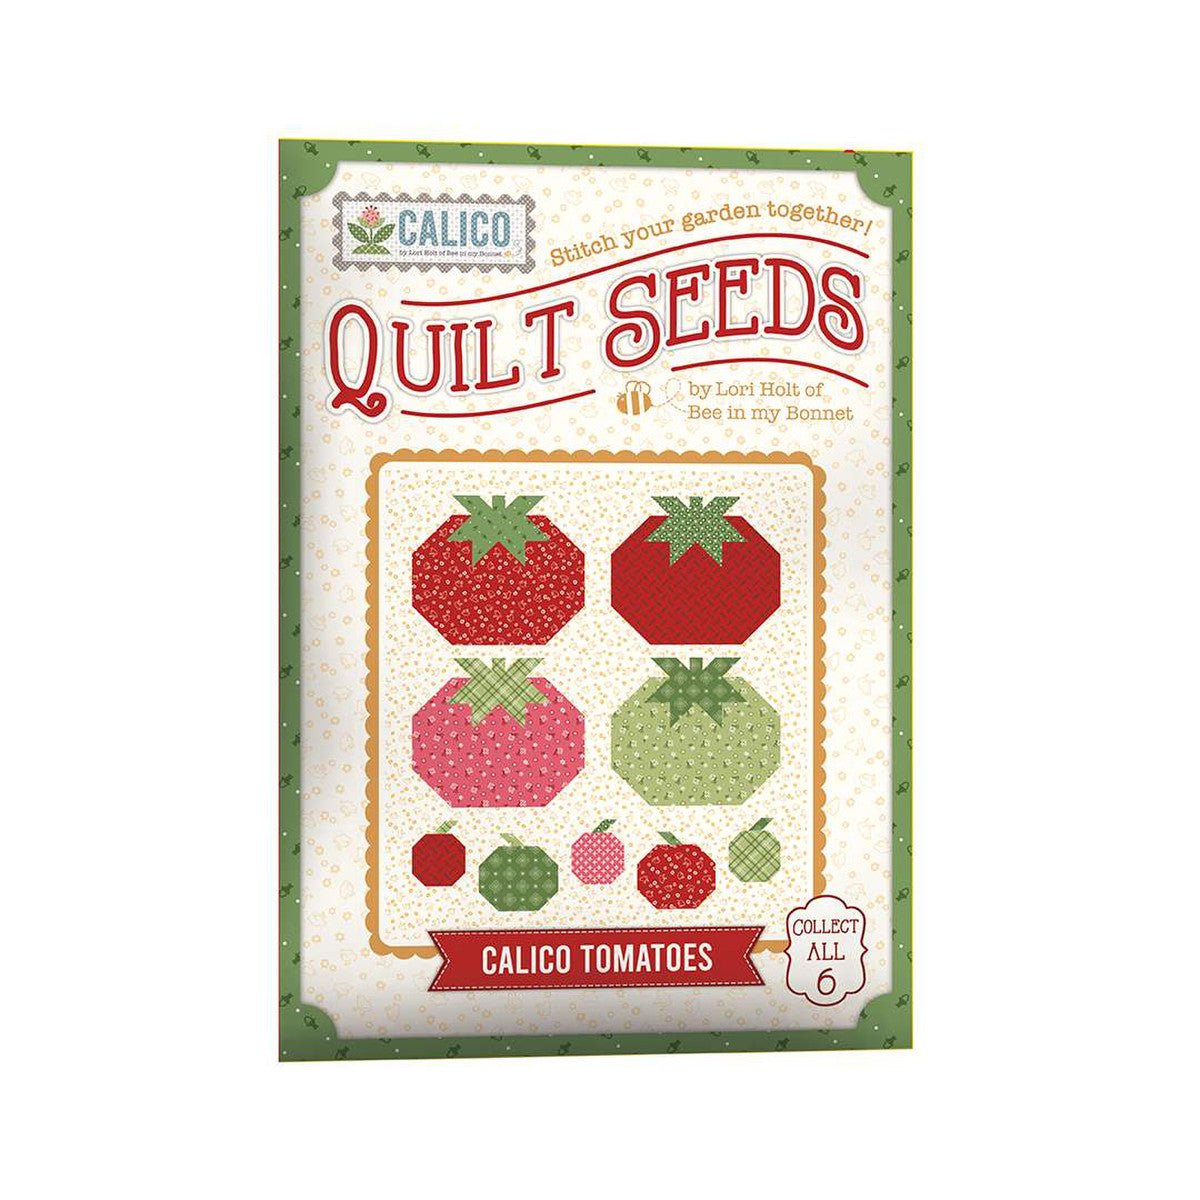 Lori Holt Quilt Seeds™ Pattern Calico Tomato